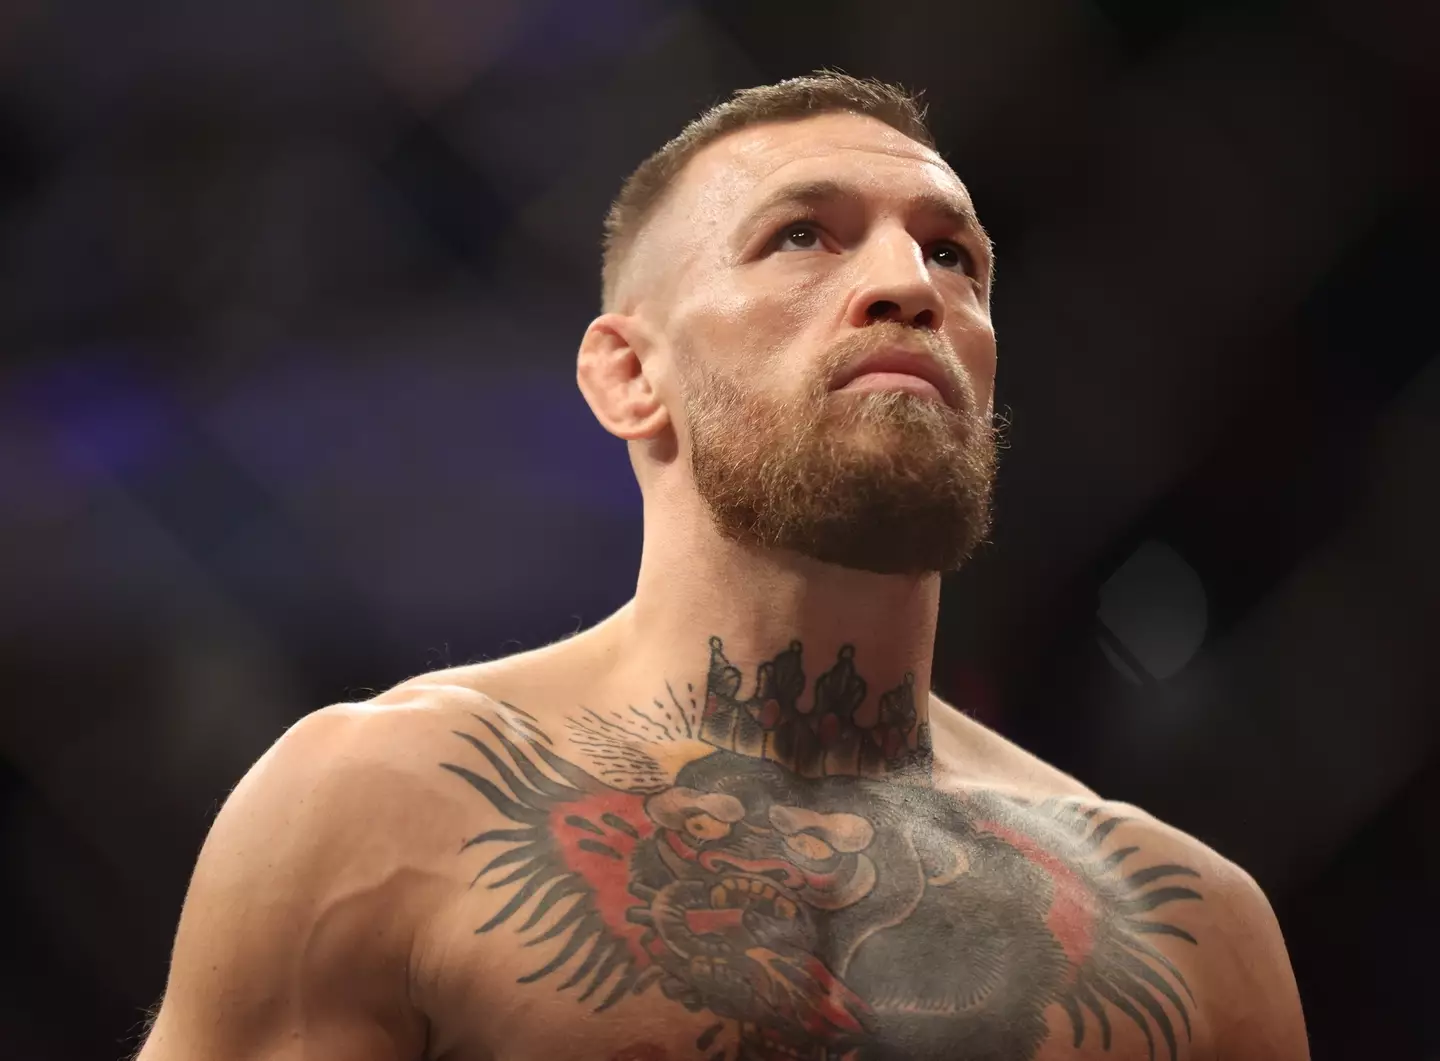 When will McGregor be back in the UFC?